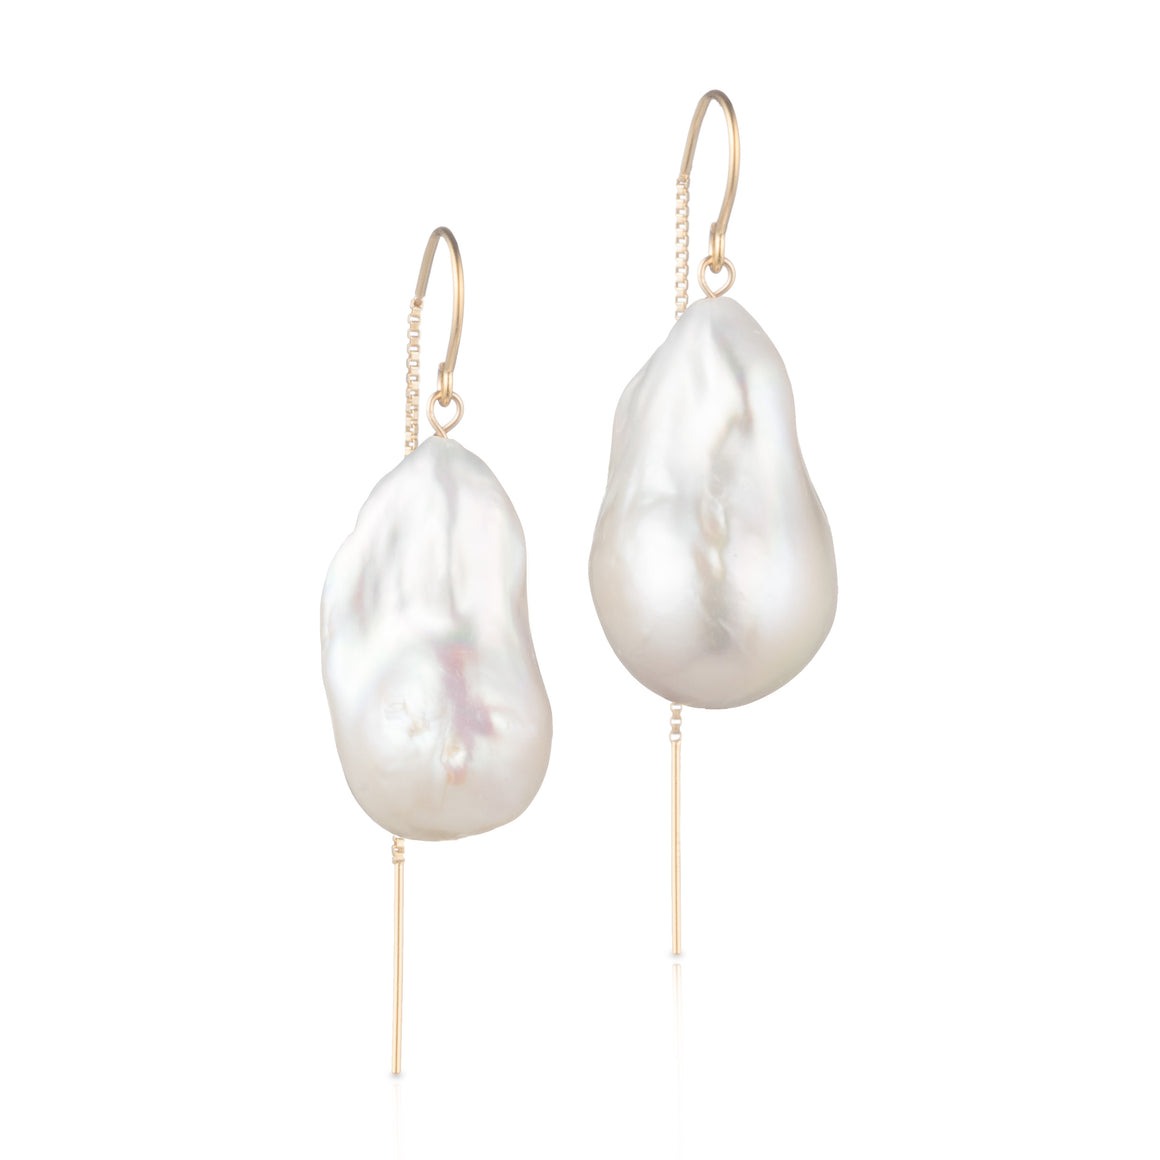 Large Baroque Freshwater Pearl Drop Threader Earrings In 14K Yellow Gold